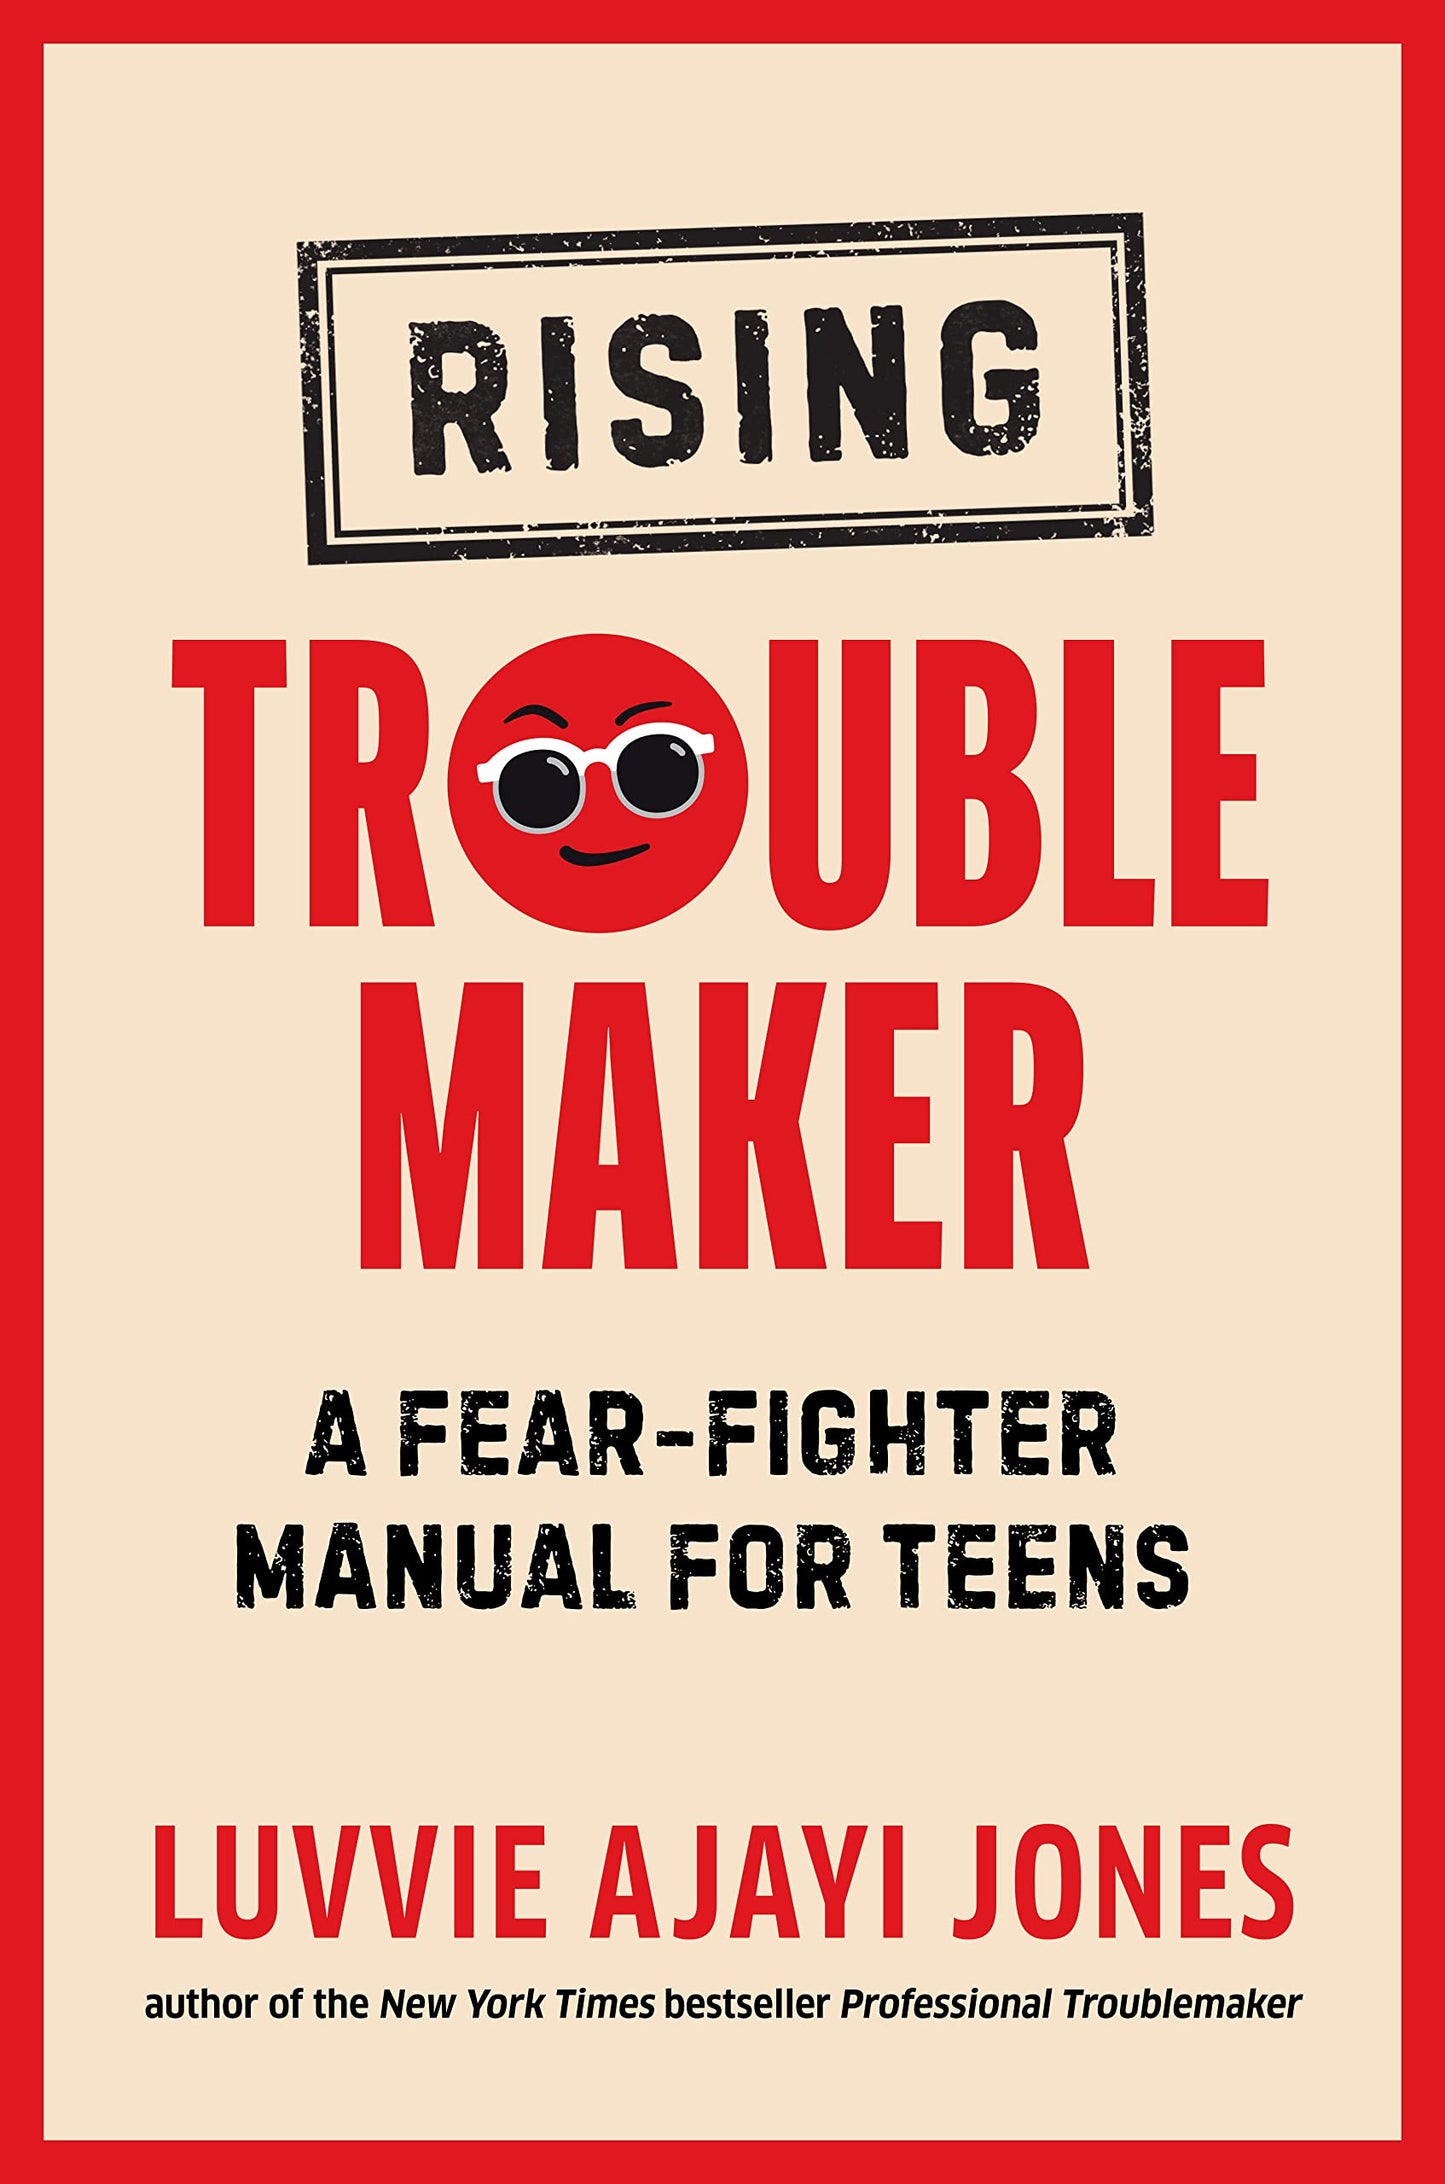 Rising Troublemaker // A Fear-Fighter Manual for Teens